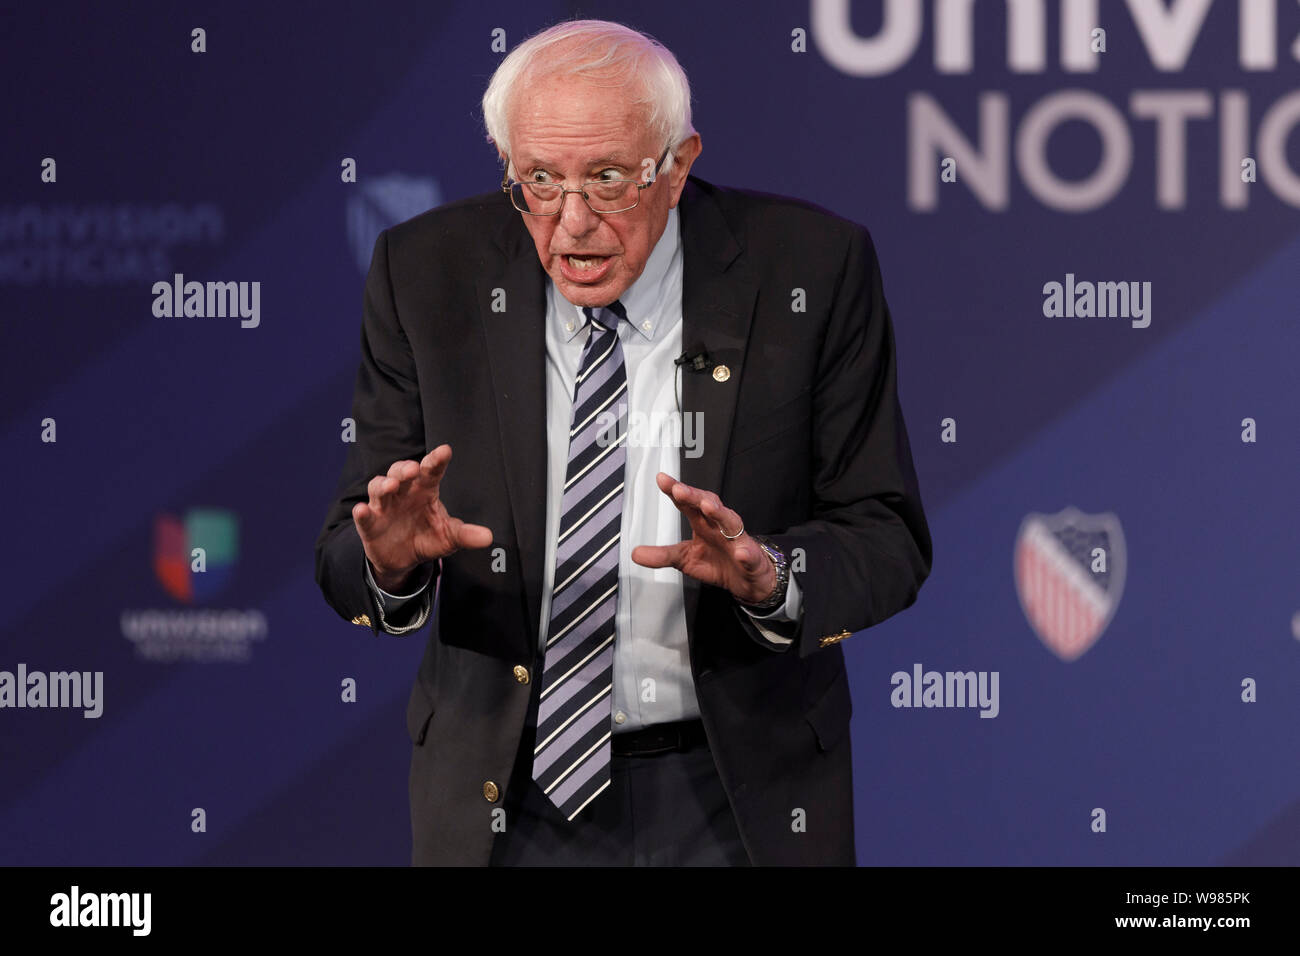 Senator Bernie Sanders, an independent from Vermont and 2020 presidential candidate, speaks during an event Stock Photo